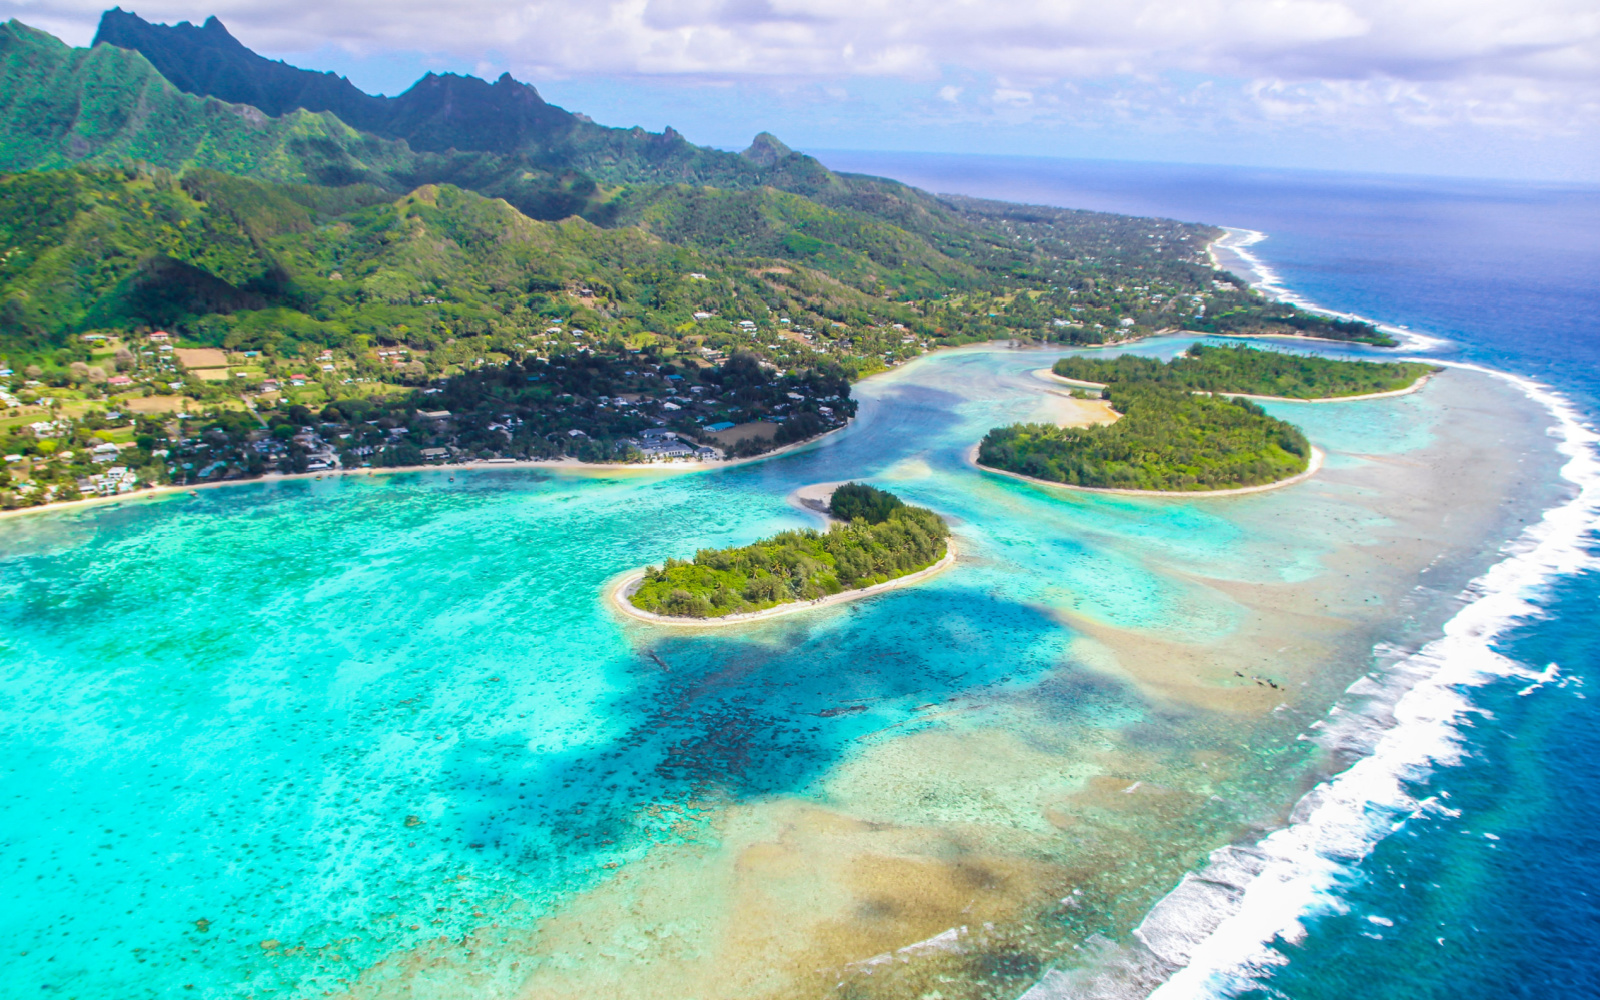 The Best Time to Visit the Cook Islands in 2023